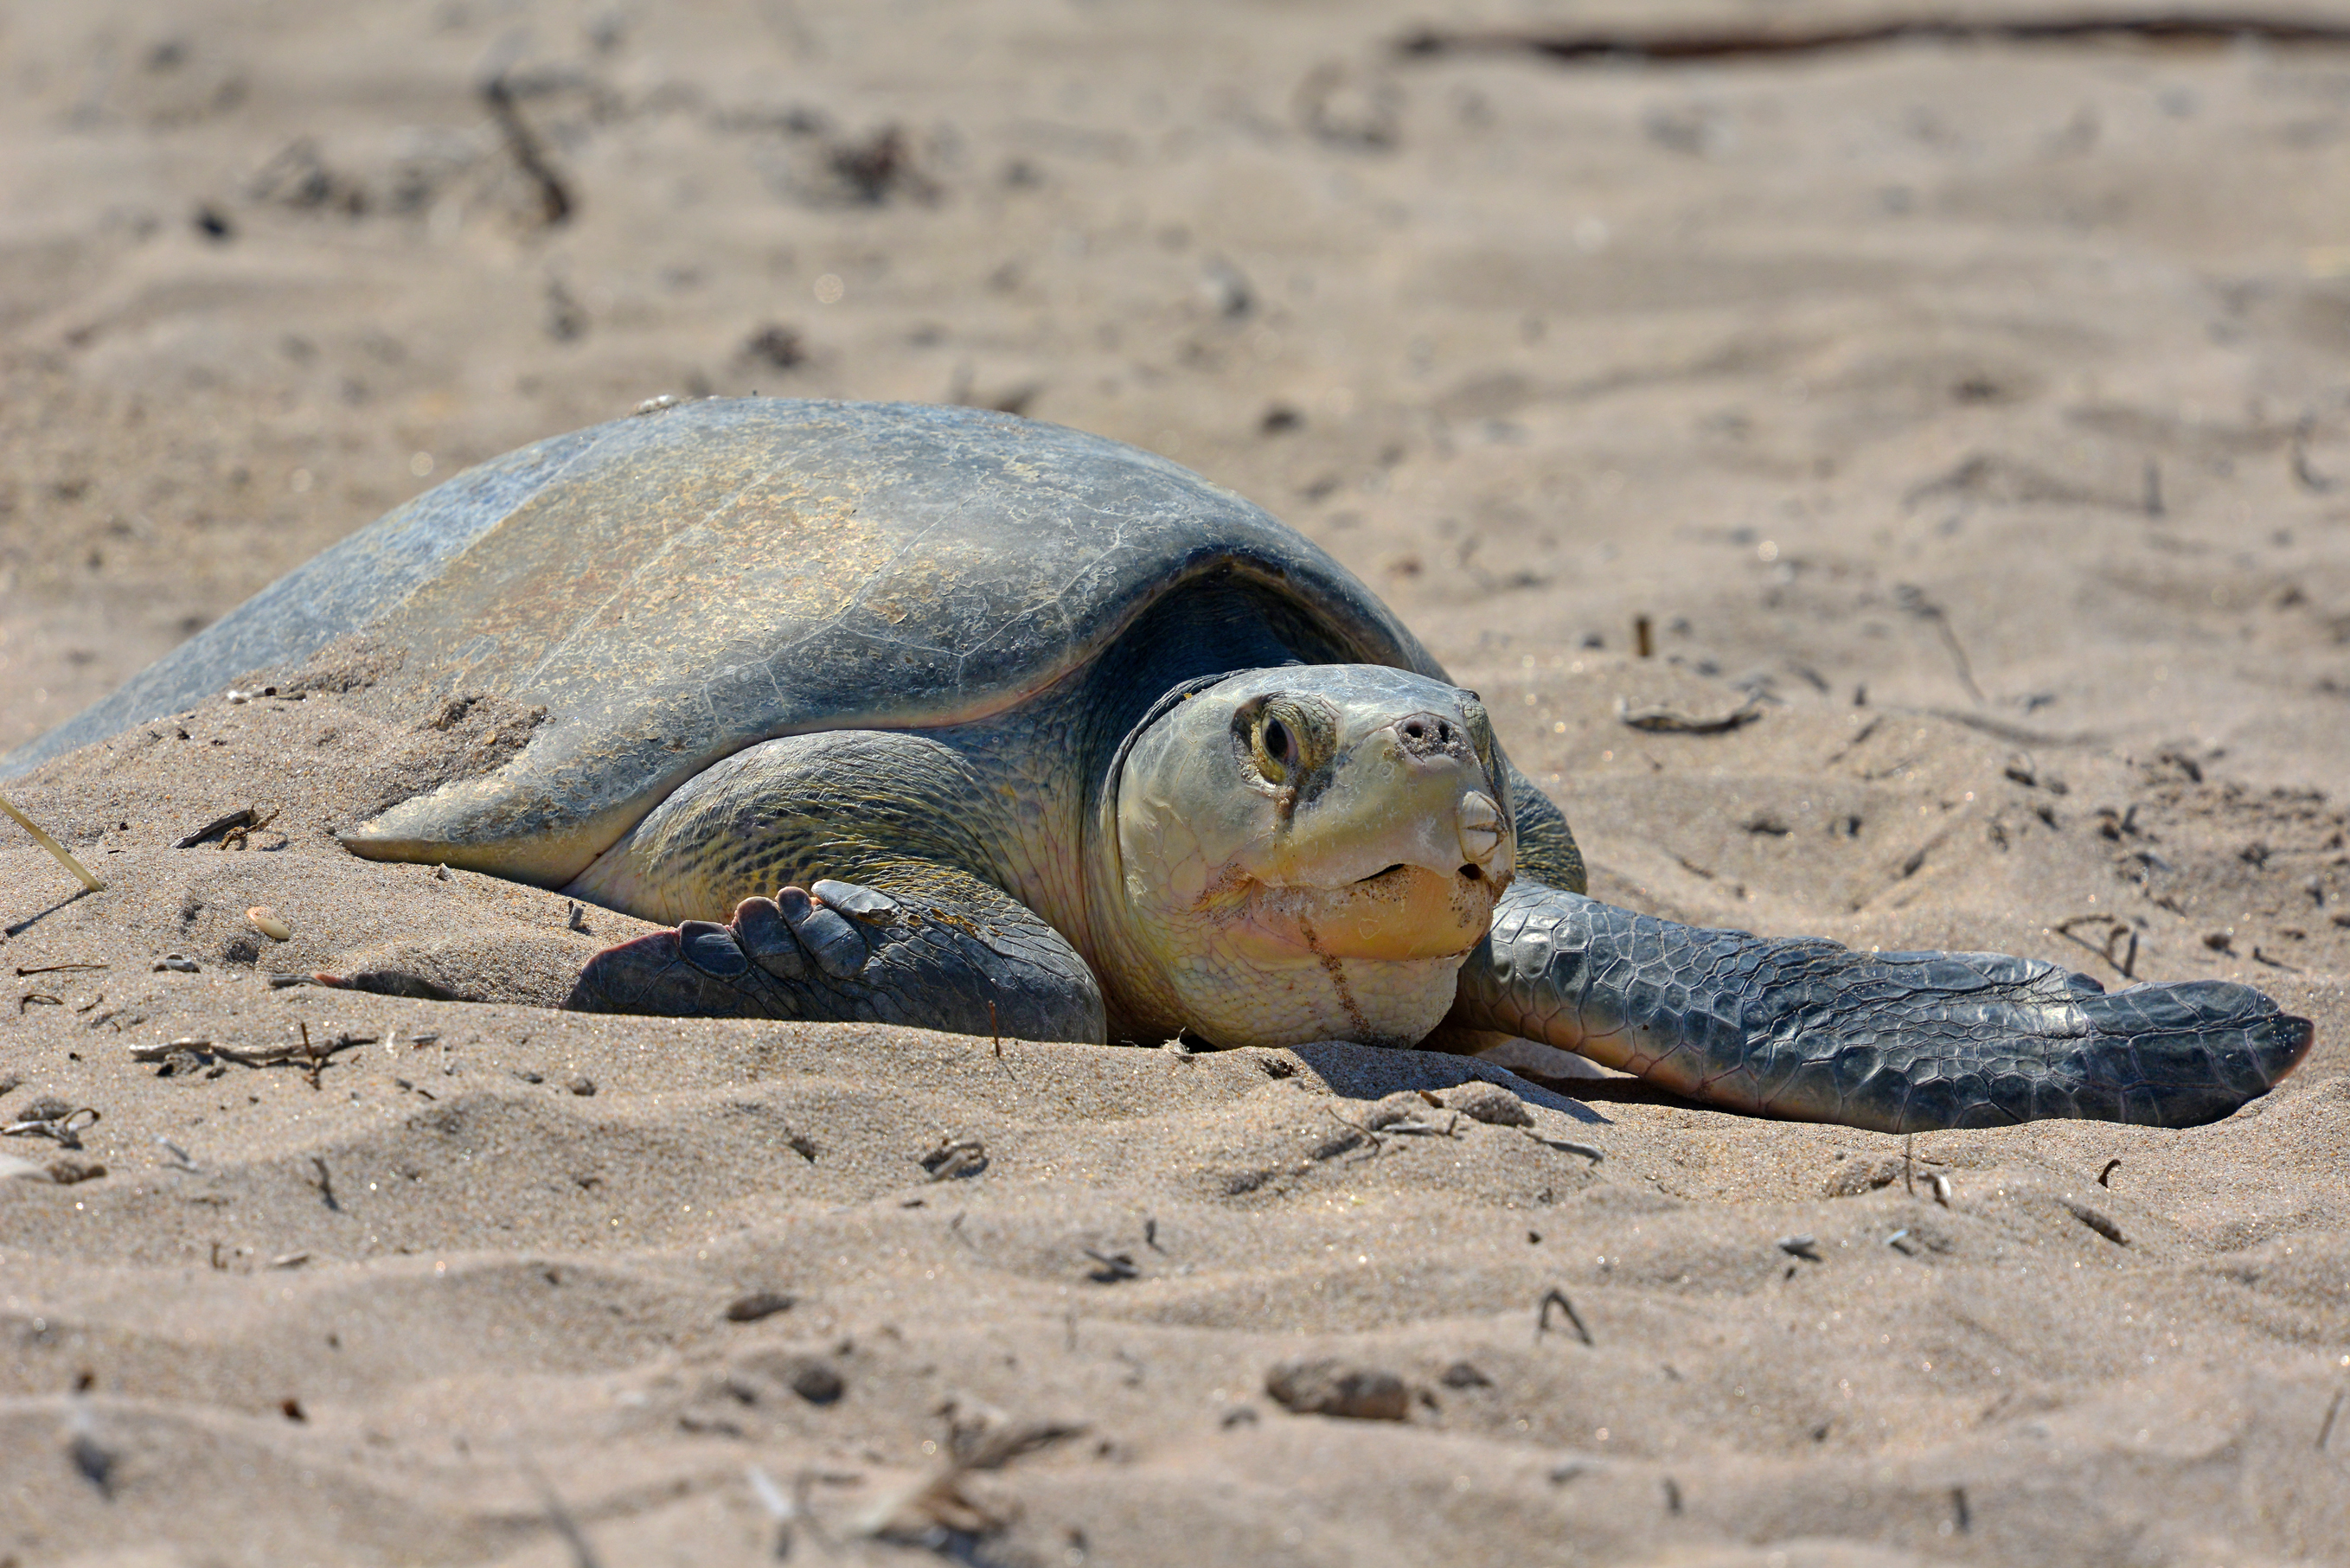 A nesting sea turtle rests on the beach 